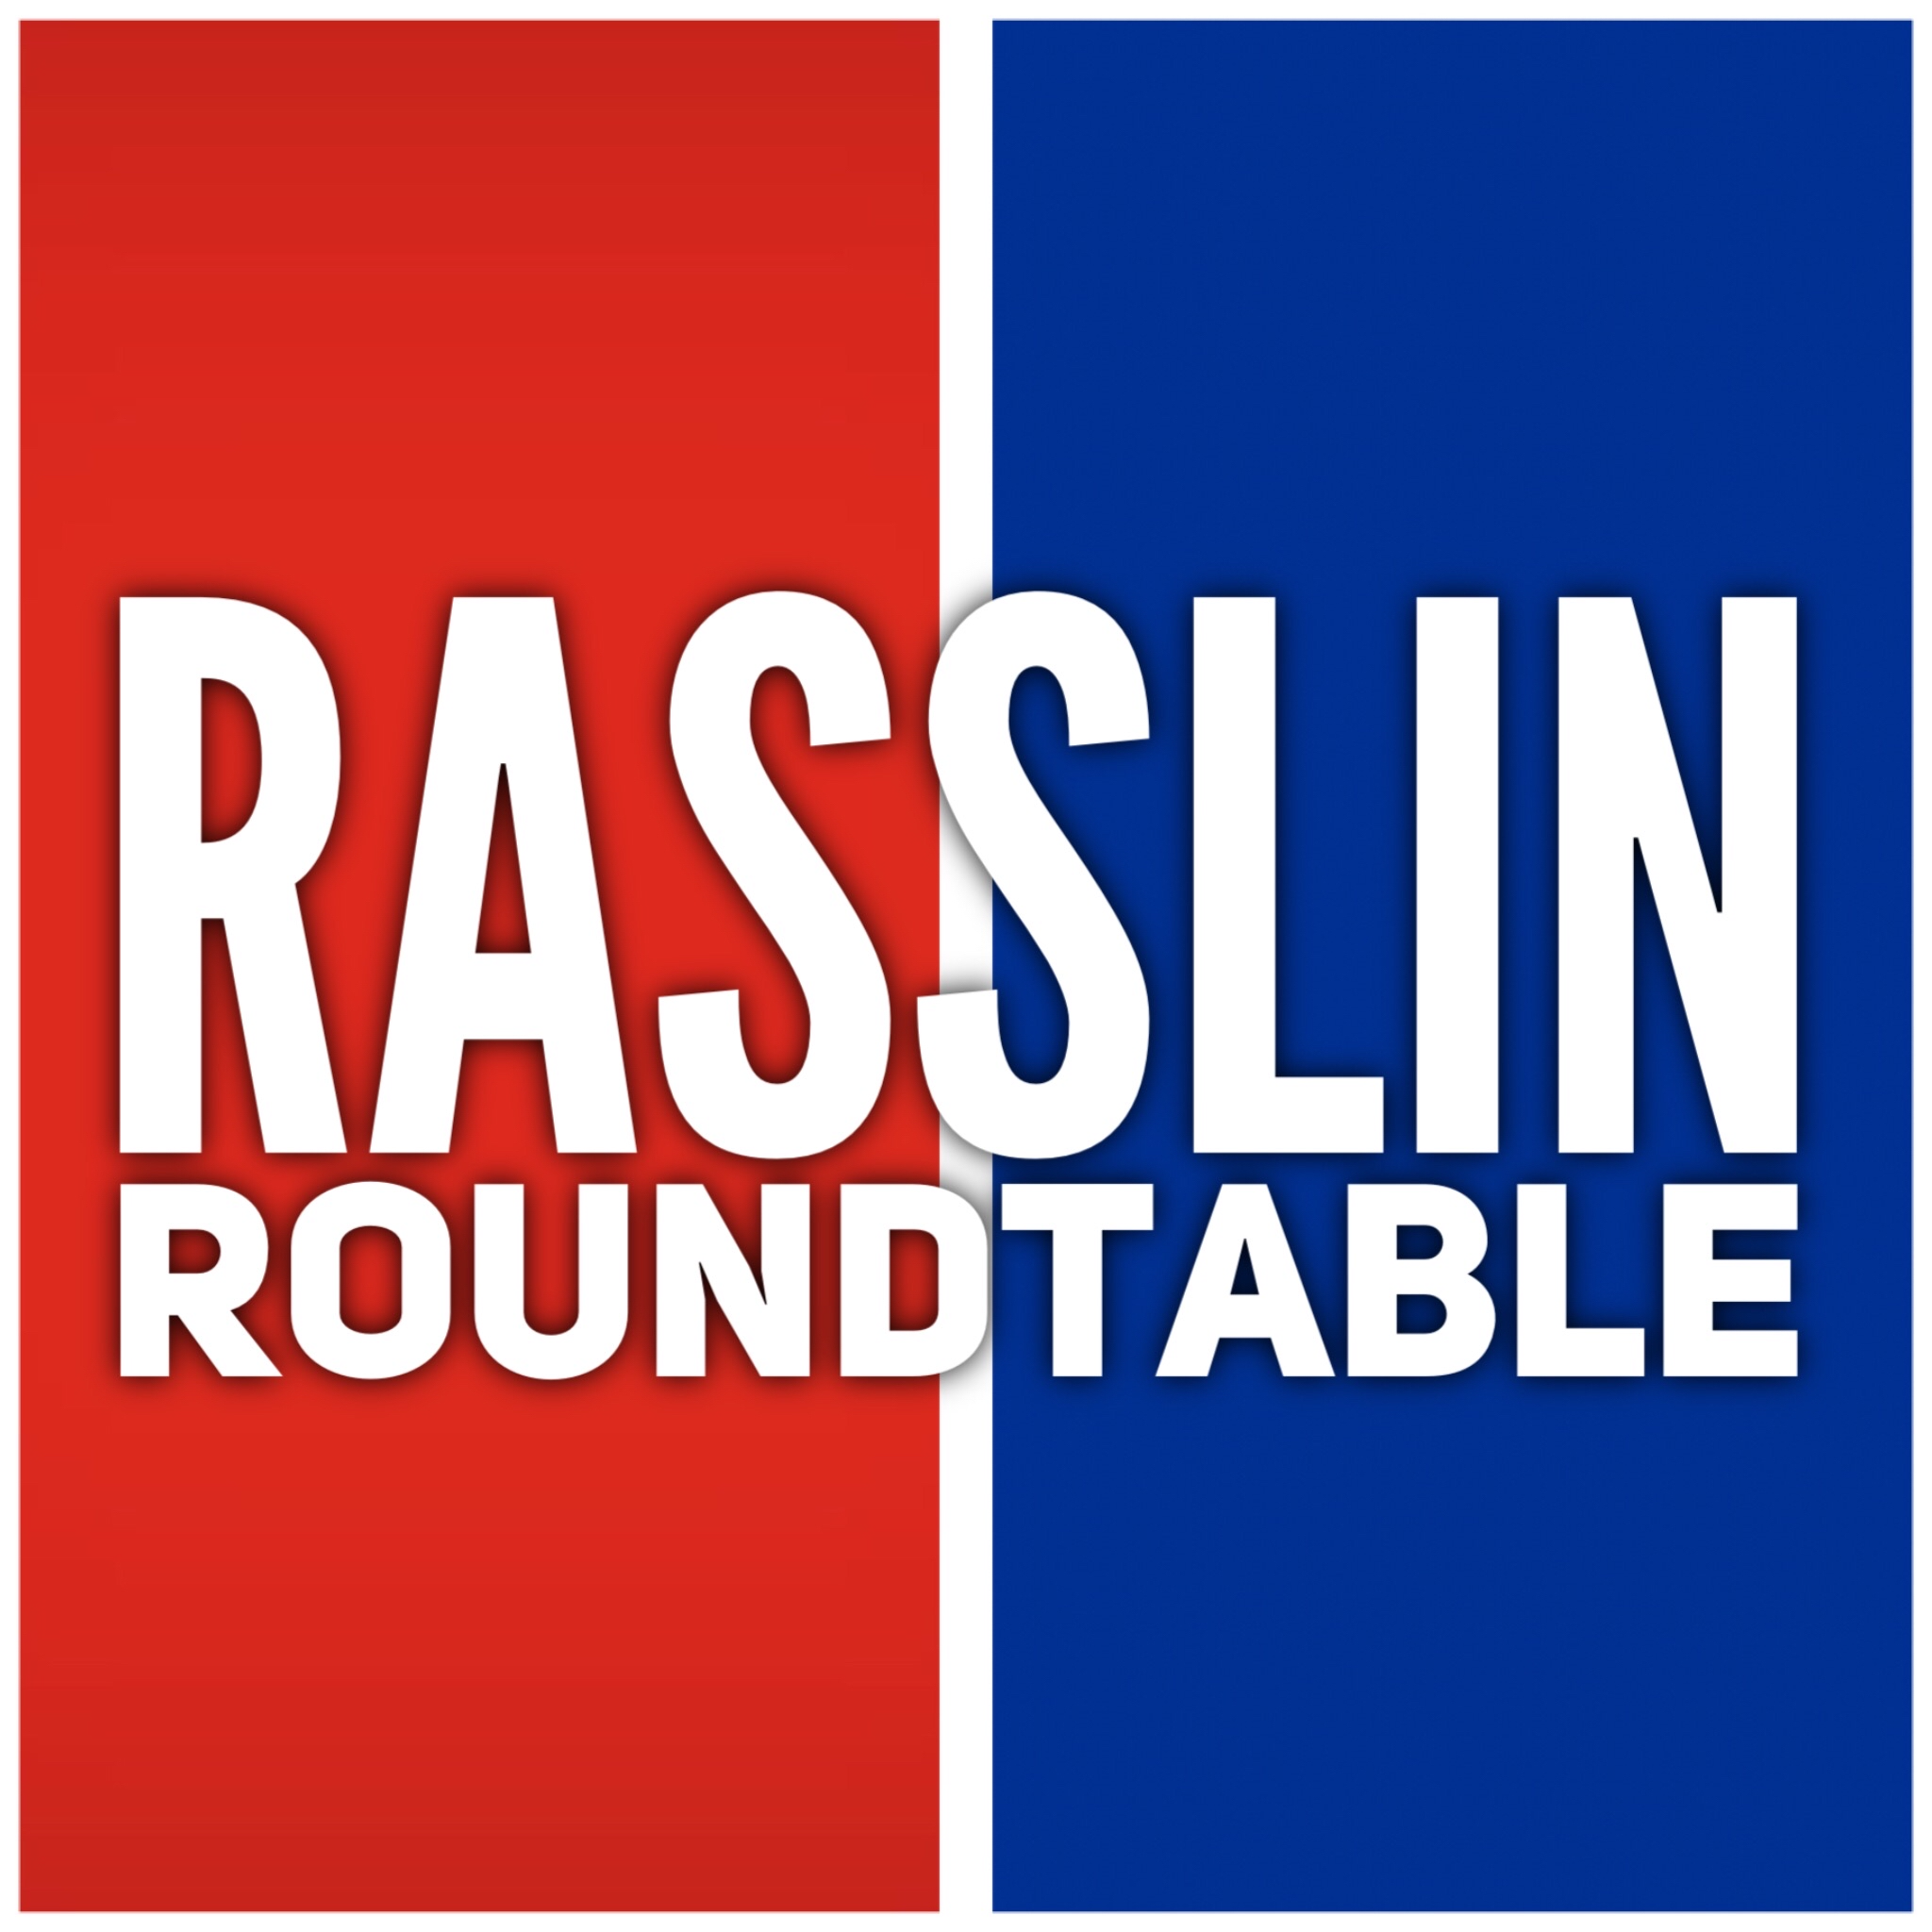 Rasslin Roundtable.PNG